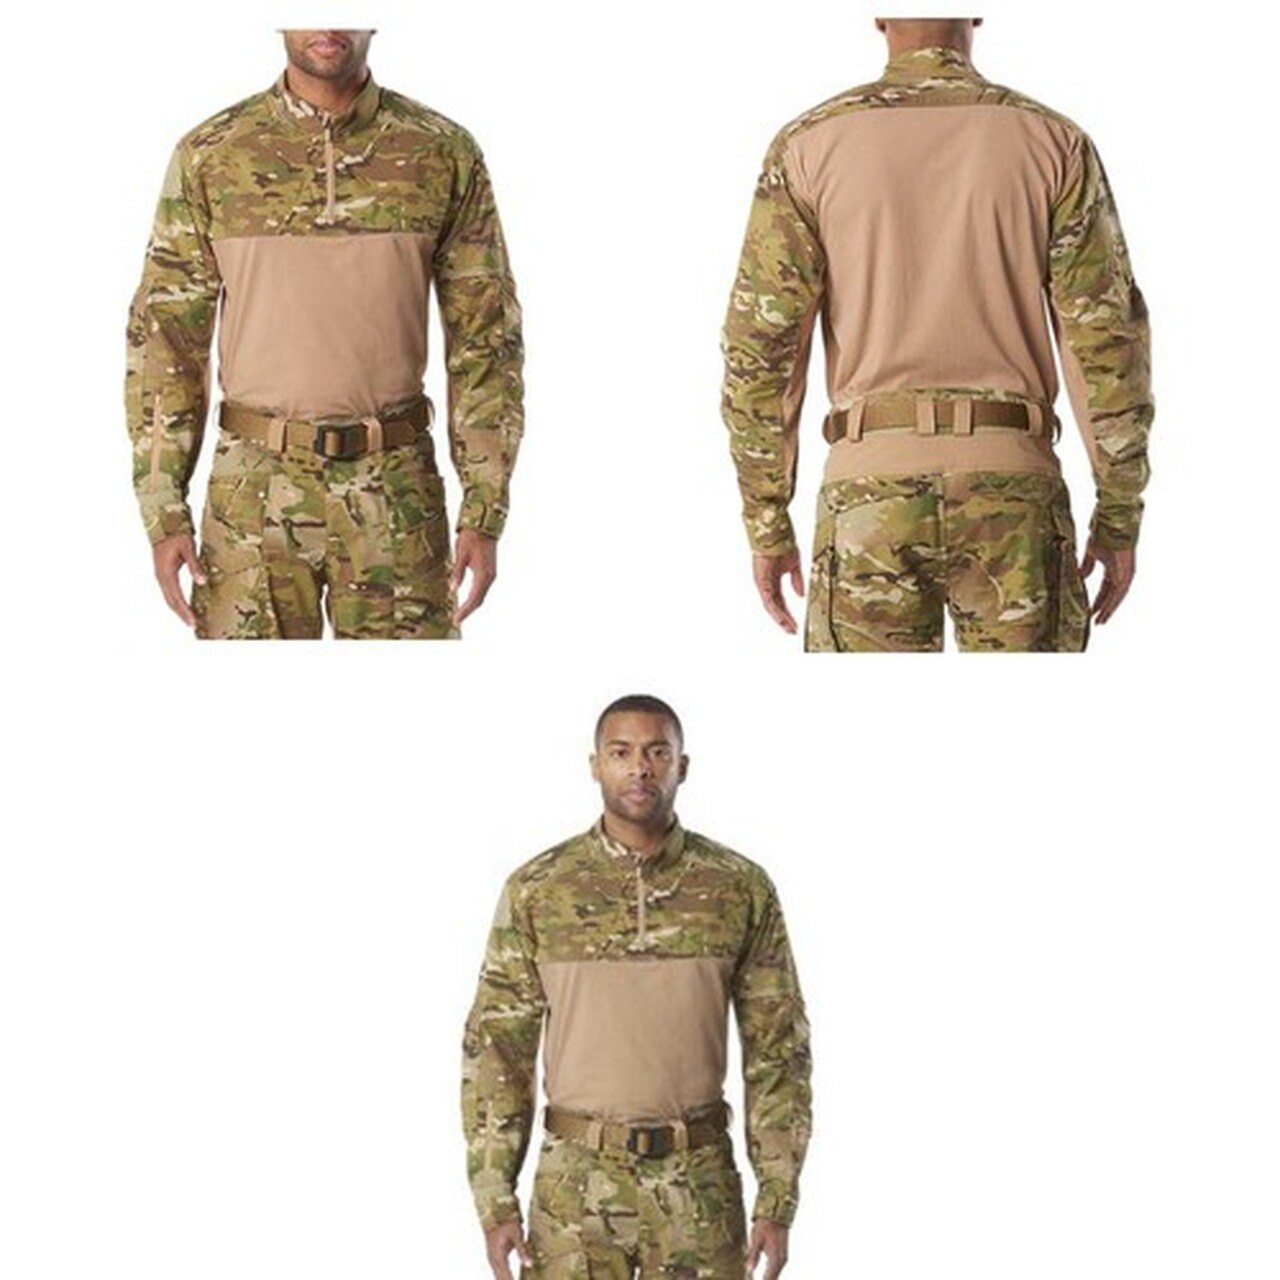 Prøve Overfladisk Slibende 5.11 Tactical 72094 MEN'S XPRT® TAN / MULTICAM® RAPID PULLOVER LONG SLEEVE  SHIRT, 60% cotton/40% Cordura® NYCO Tactical nylon, ripstop with Teflon®  finish, Sleeve Pockets, with Mandarin Collar, And Adjustable Cuffs – ASS911